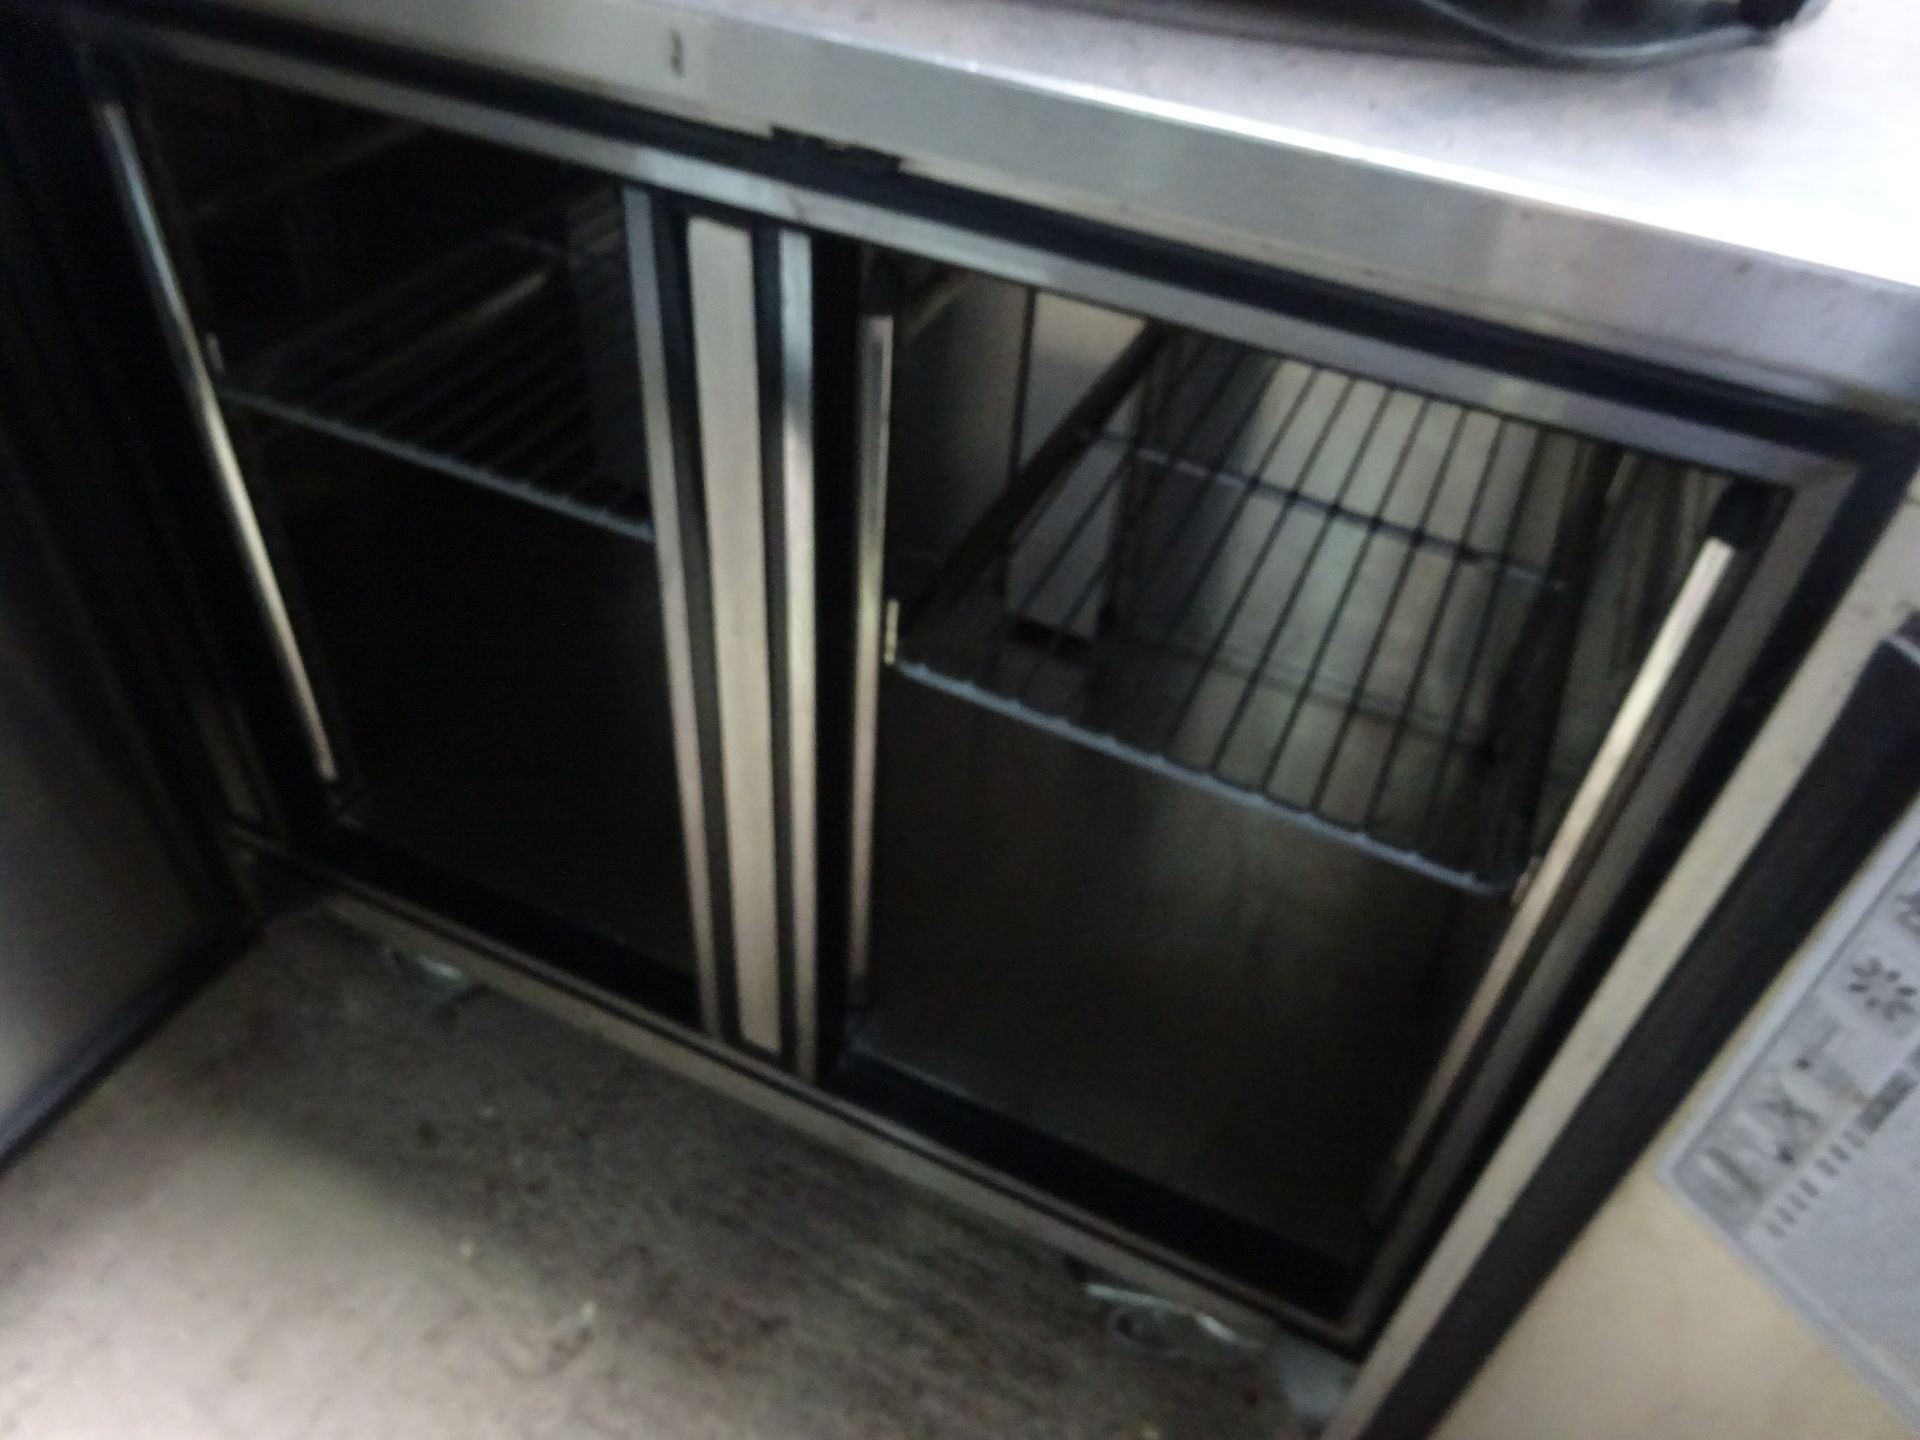 Foster three door under counter fridge, 240v, width 186cms, depth 70cms and height 86cms. - Image 4 of 5